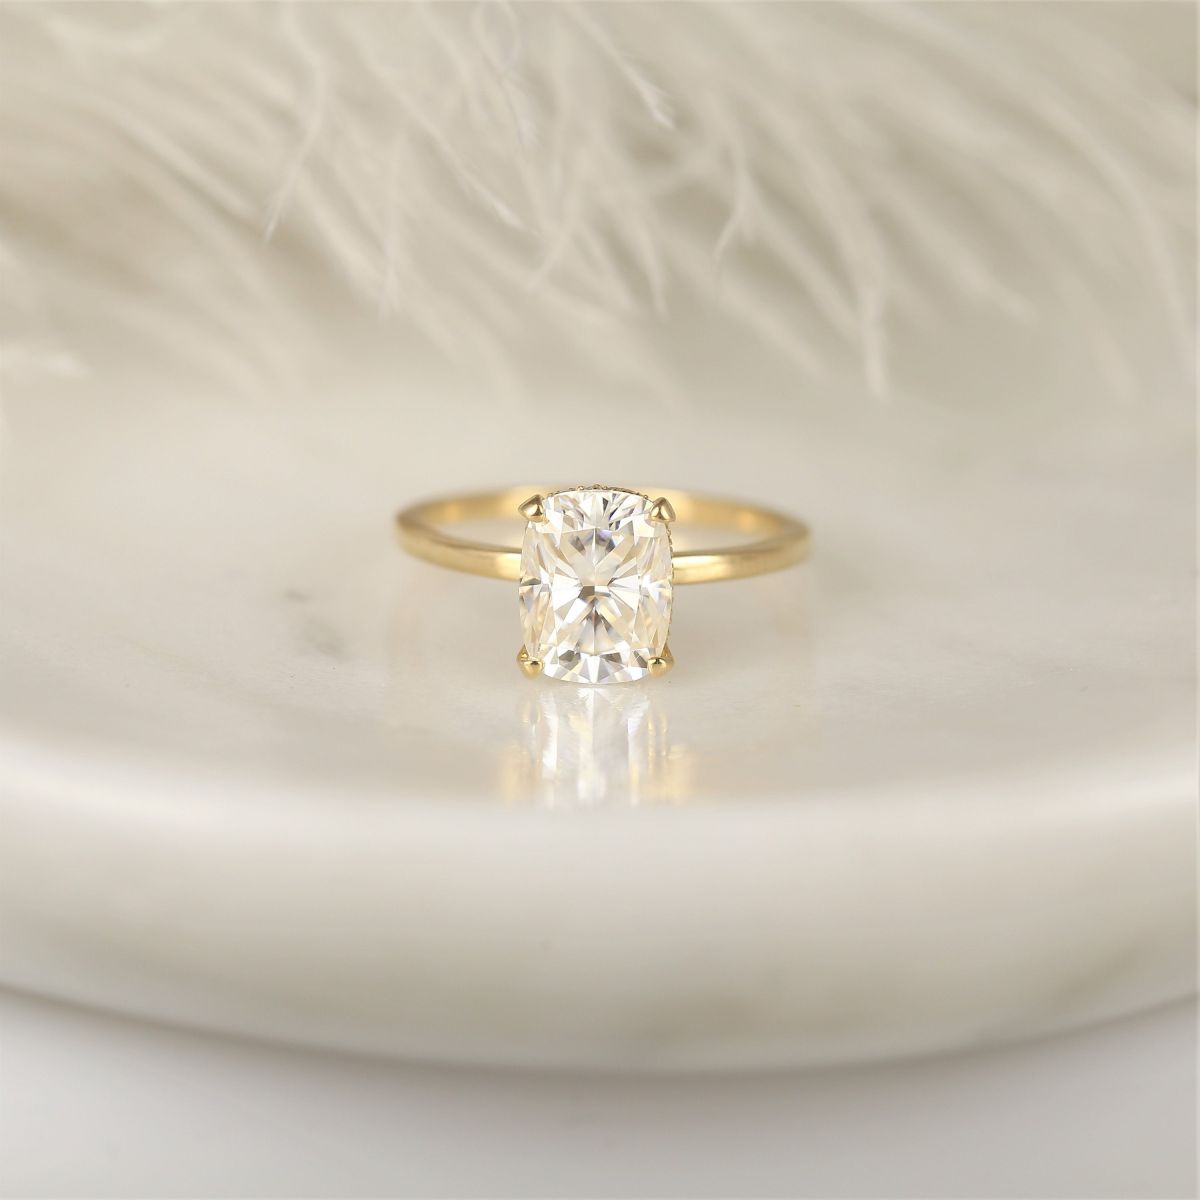 2.30ct LOW Tansy 9x7mm 14kt Gold Moissanite Diamond Cushion Hidden Halo Ring by Rosados Box